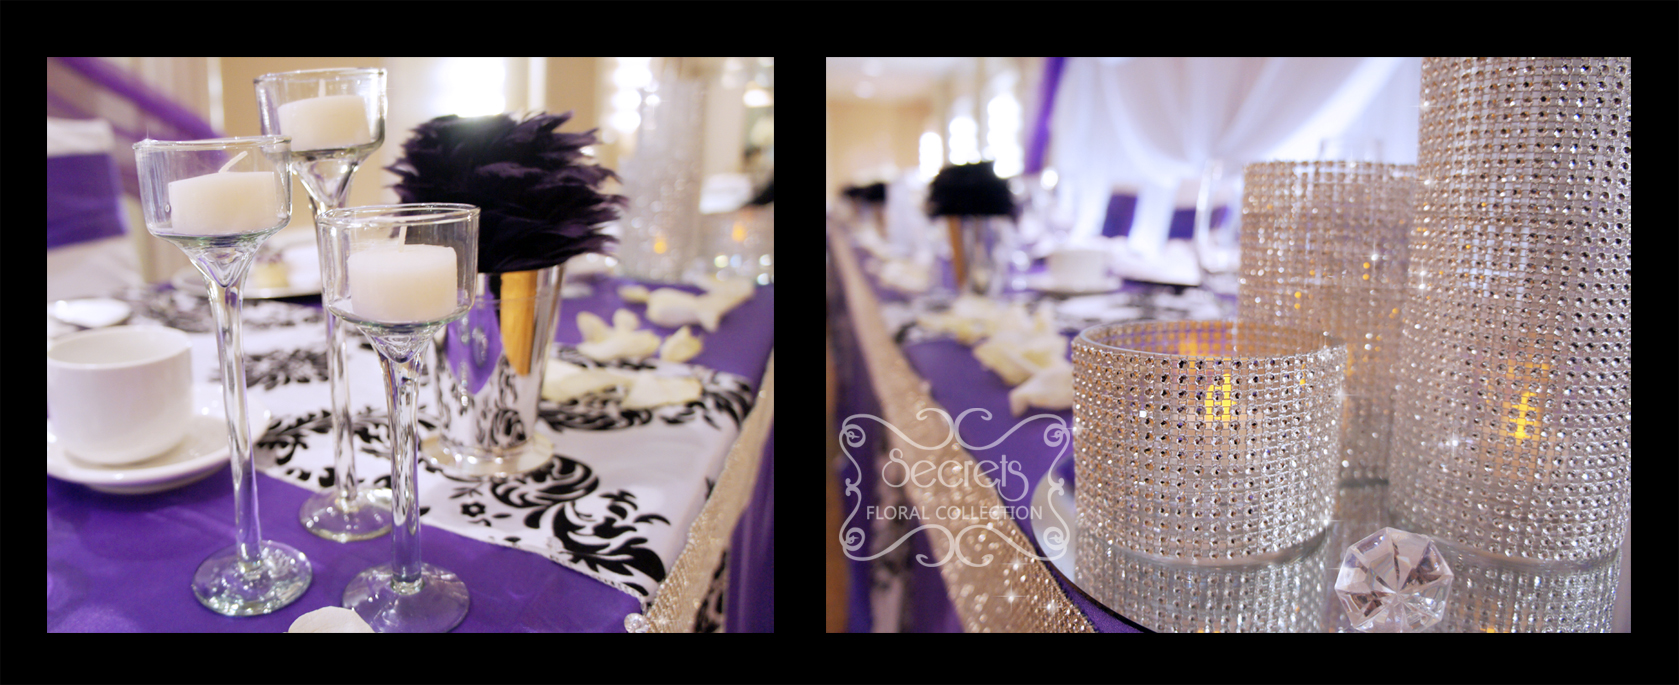 Head table is decorated with bling bling candle holders, stemmed glass candled holders, purple feather ball, and sprinkled with diamond confetti and rose petals - Toronto Wedding Decor Created by Secrets Floral Collection